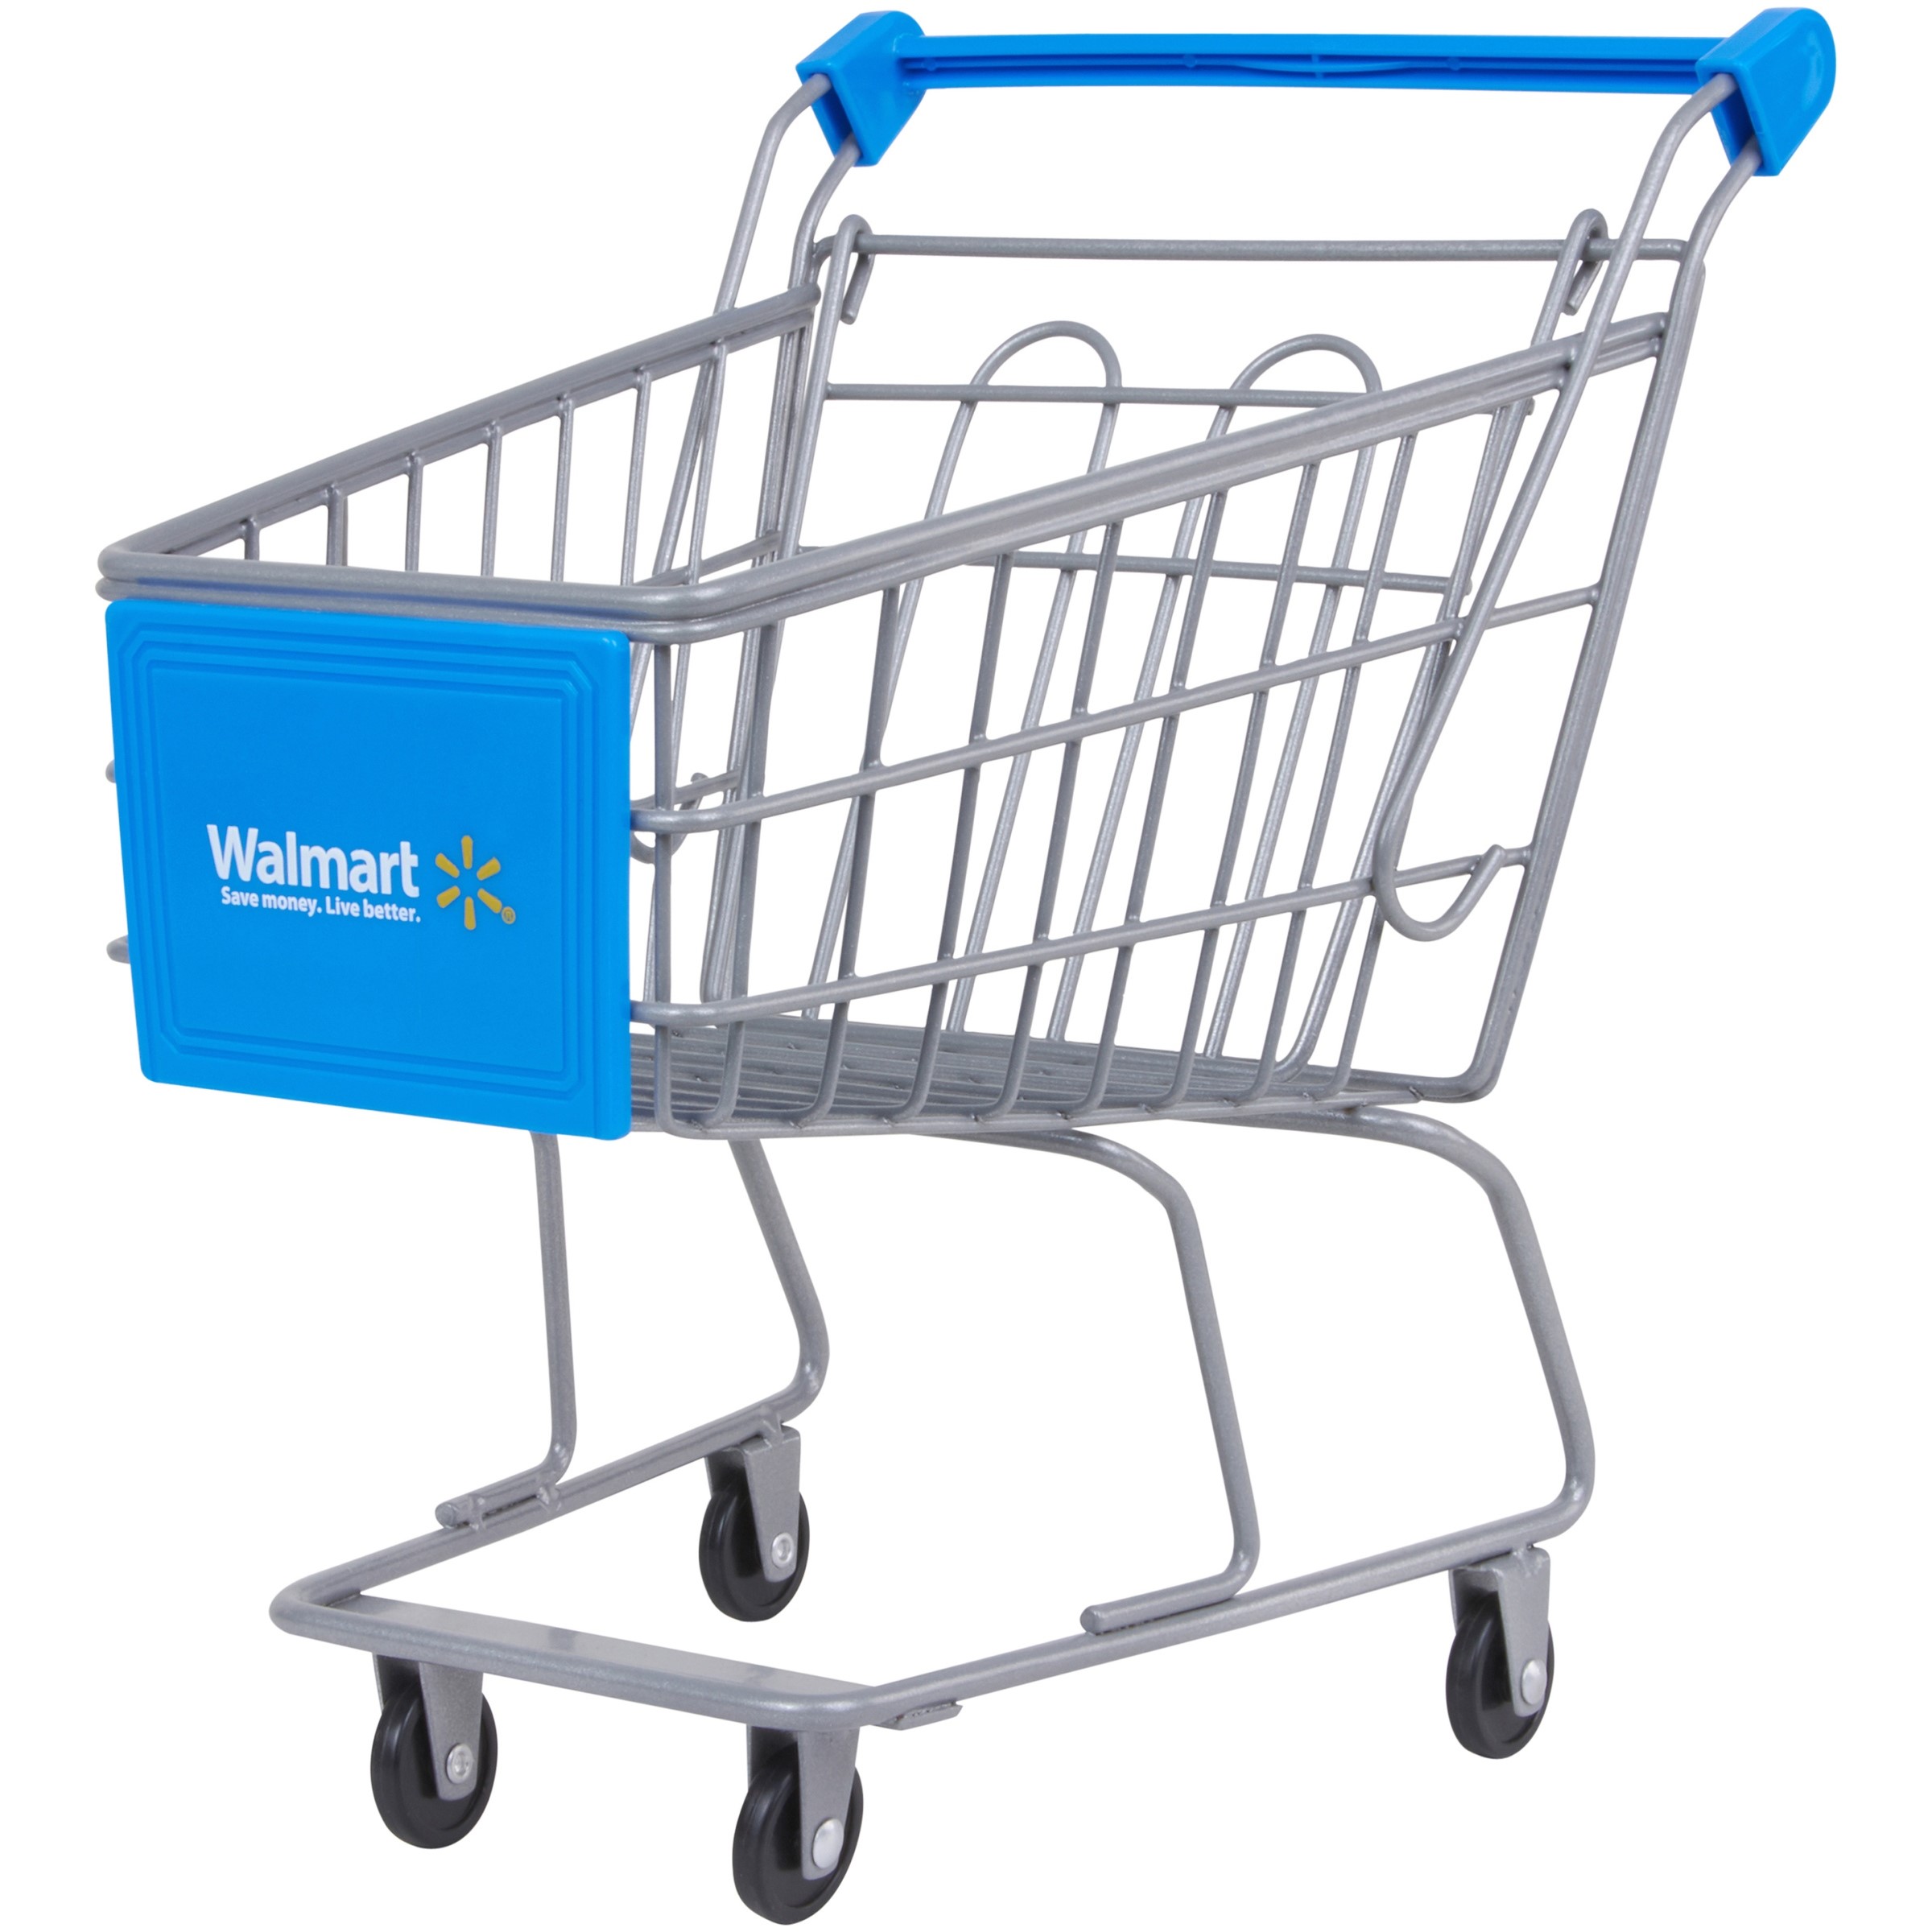 My Life As Shopping Cart, Walmart Logo, Accessory for 18" Dolls - image 1 of 2